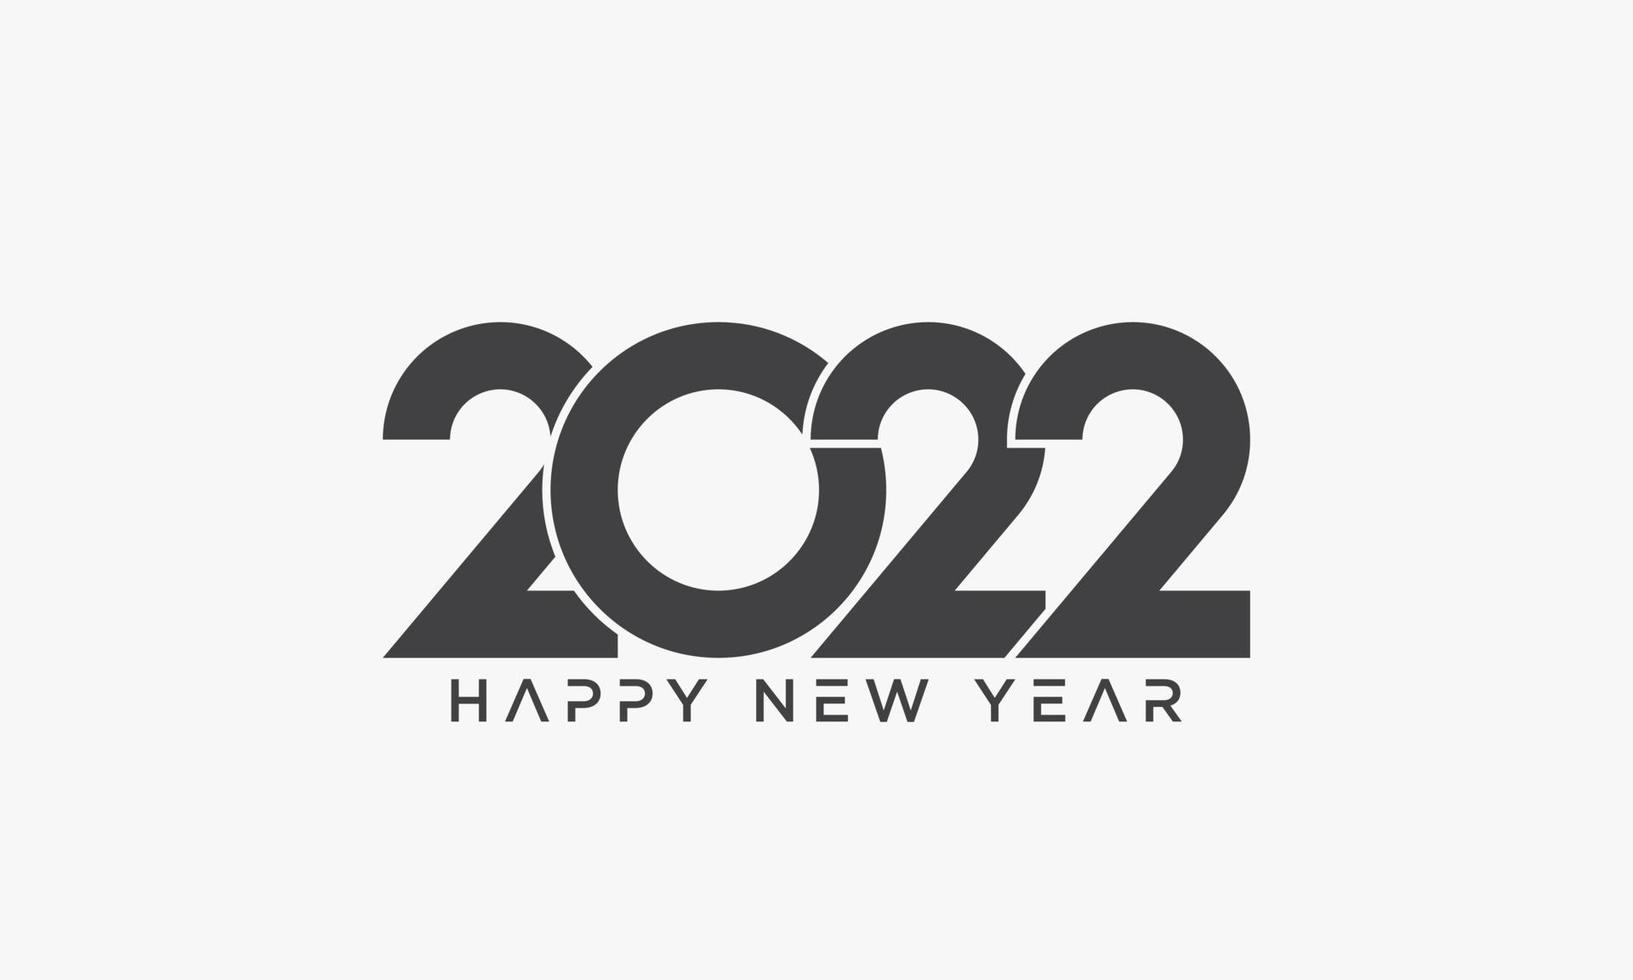 Logo 2022. Happy new year holidays vector graphic design.